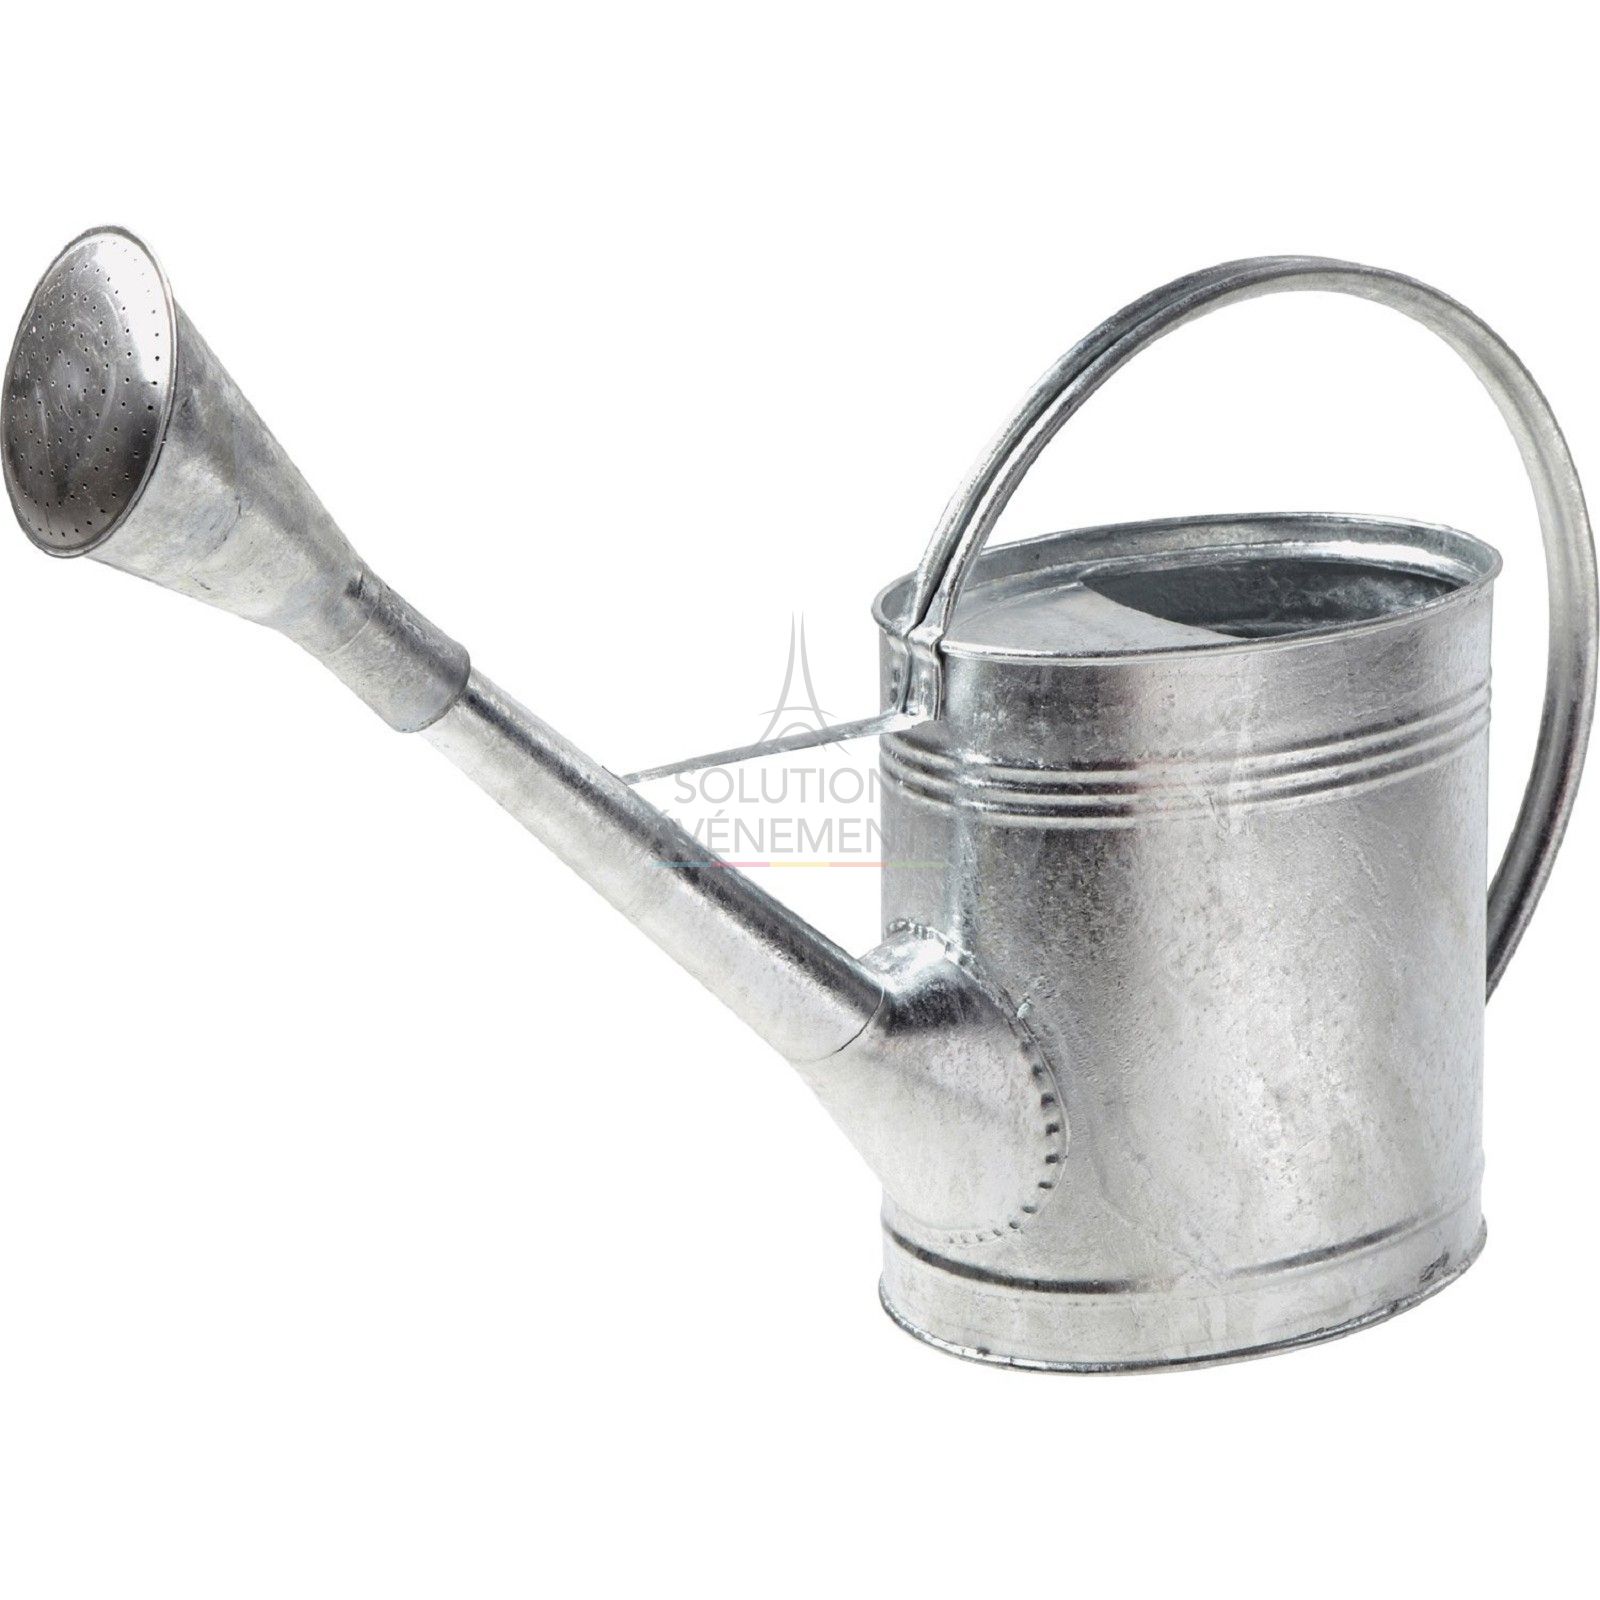 Decorative watering can rental